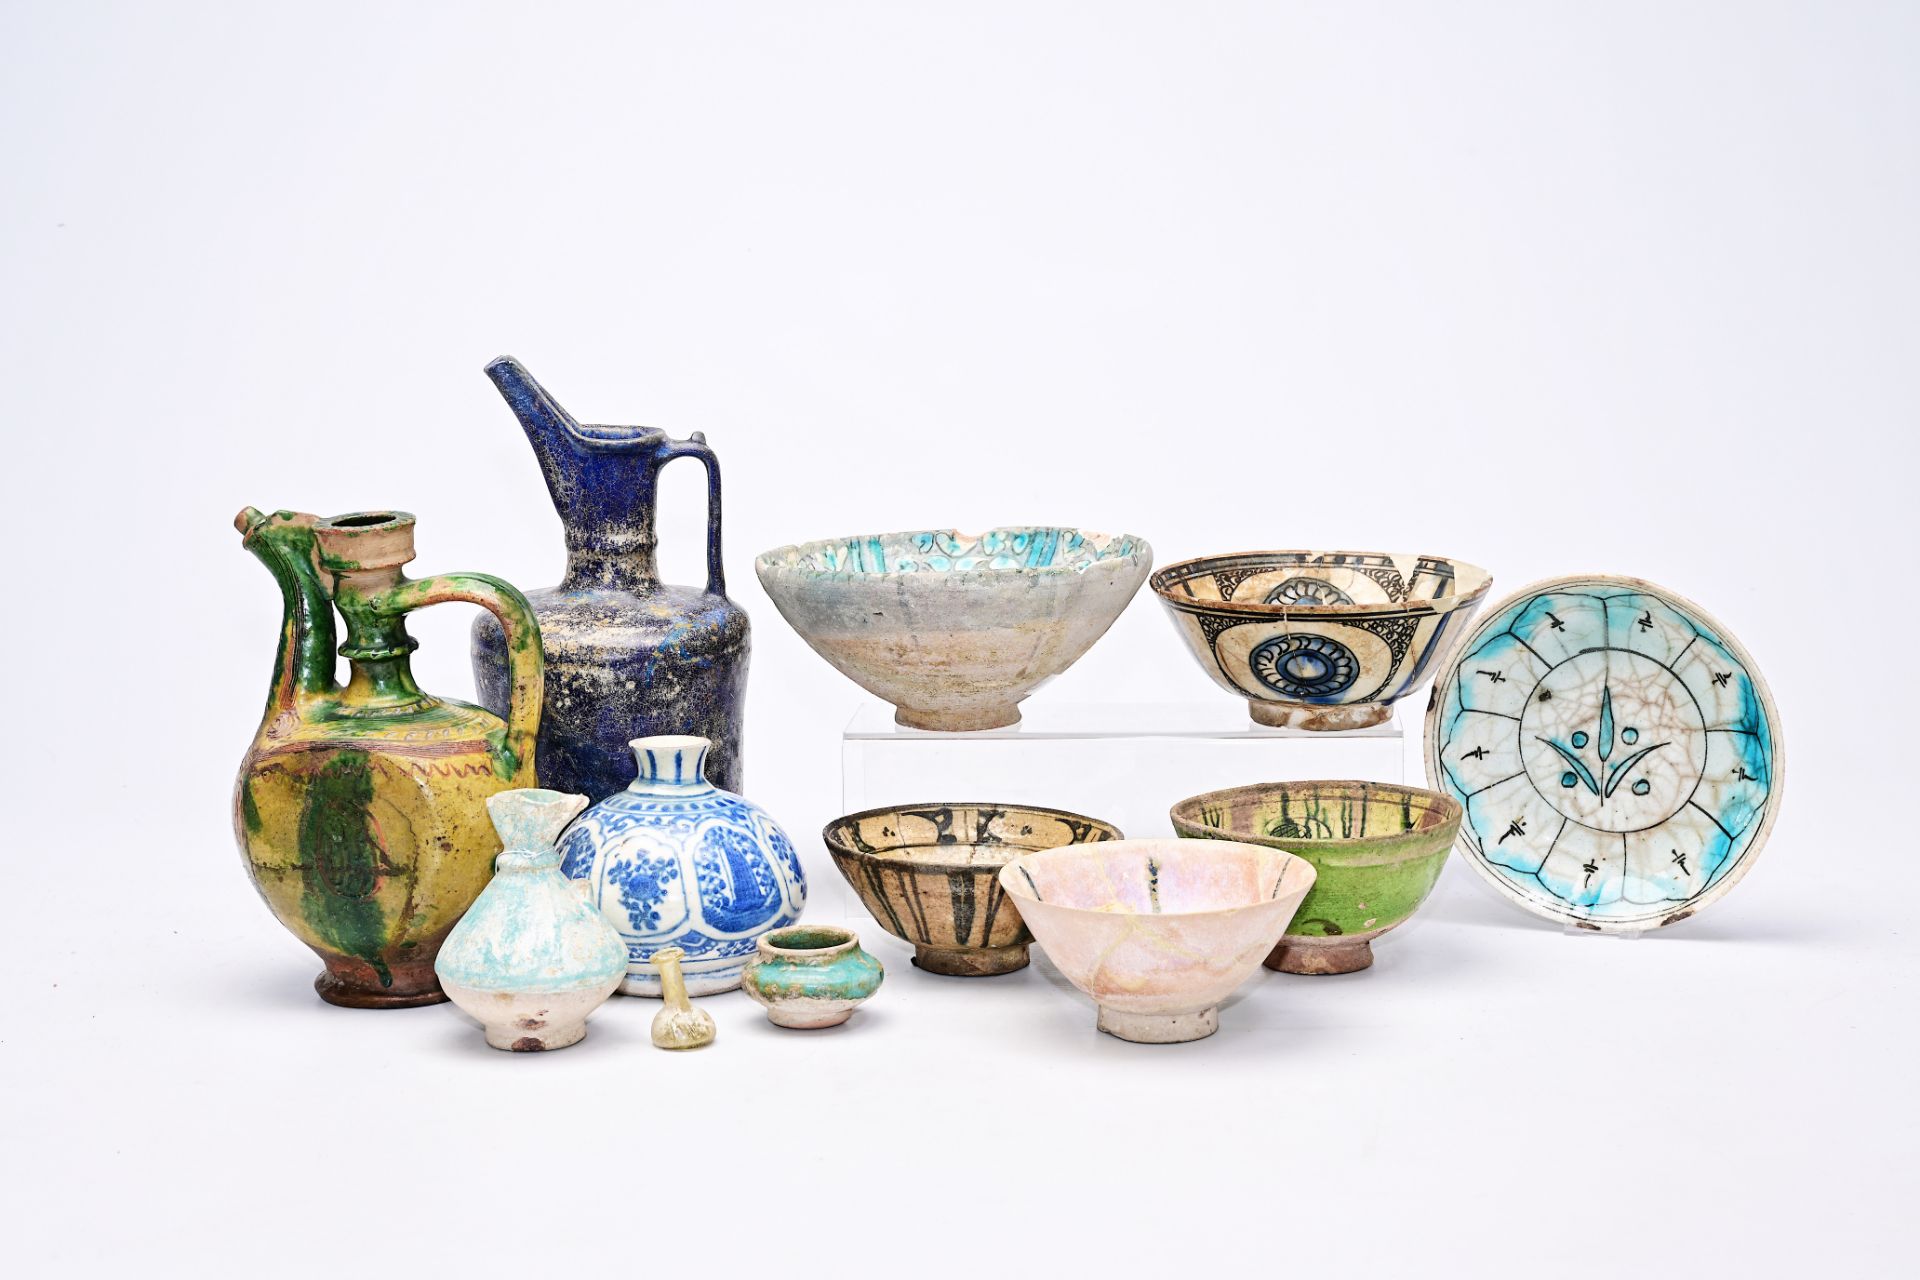 Twelve Ottoman and Persian pottery wares, 13th C. and later - Image 2 of 34